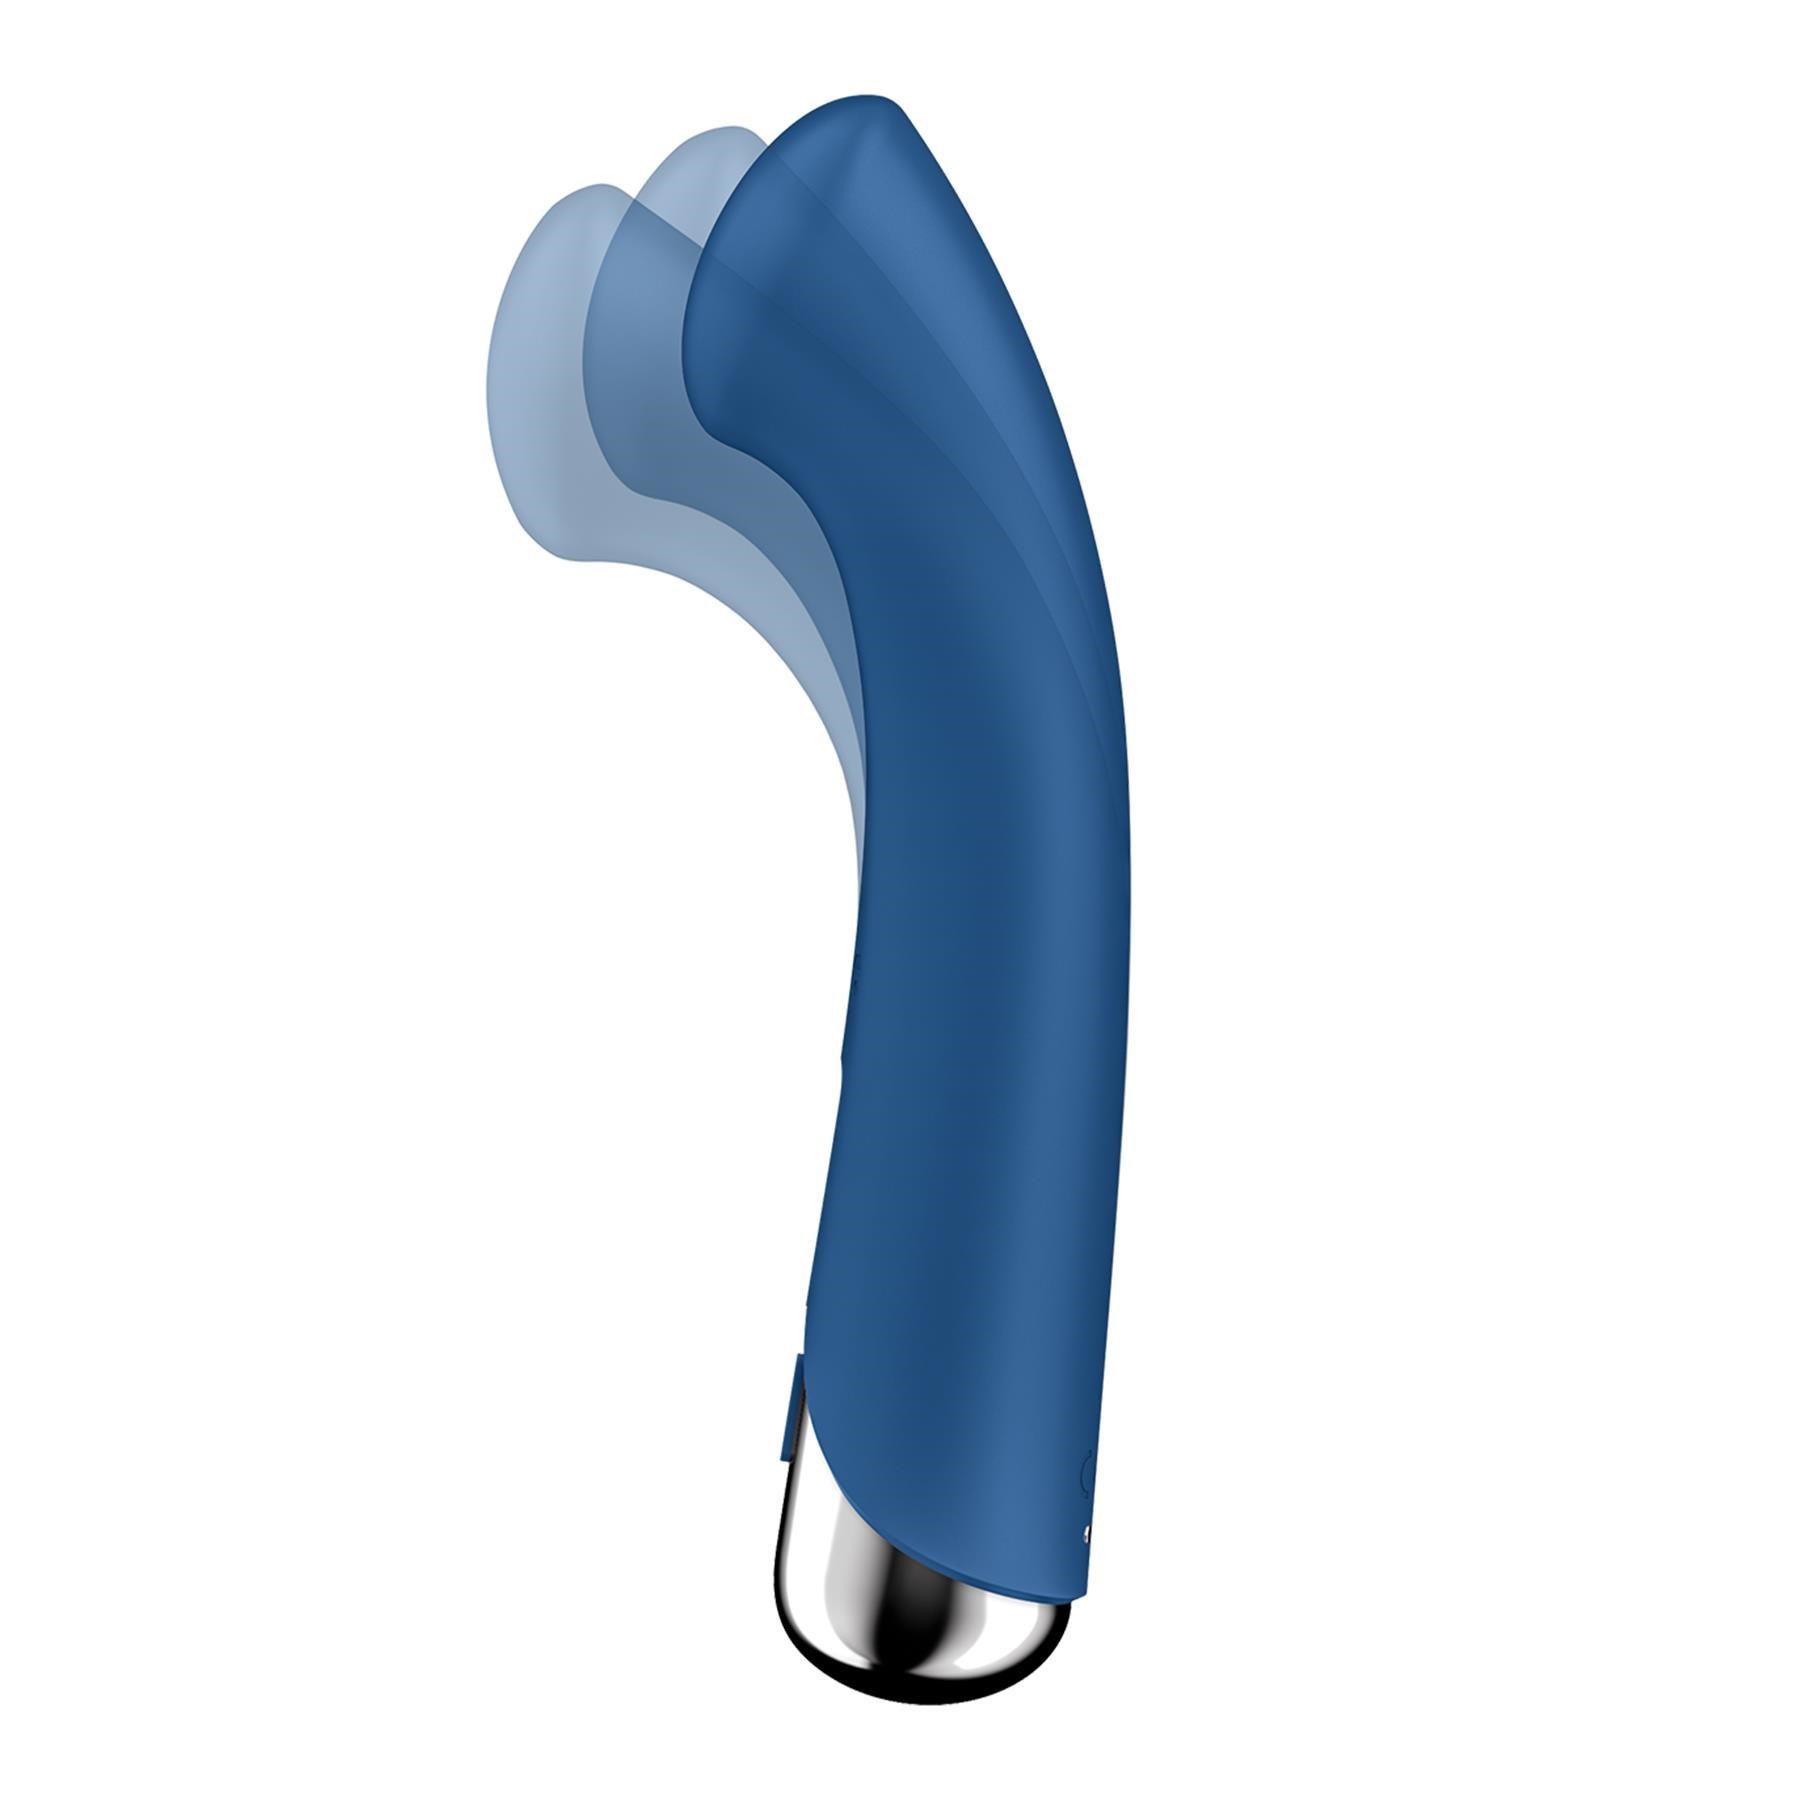 Satisfyer Spinning G-Spot Vibrator - Product Shot - Showing Spinning Action